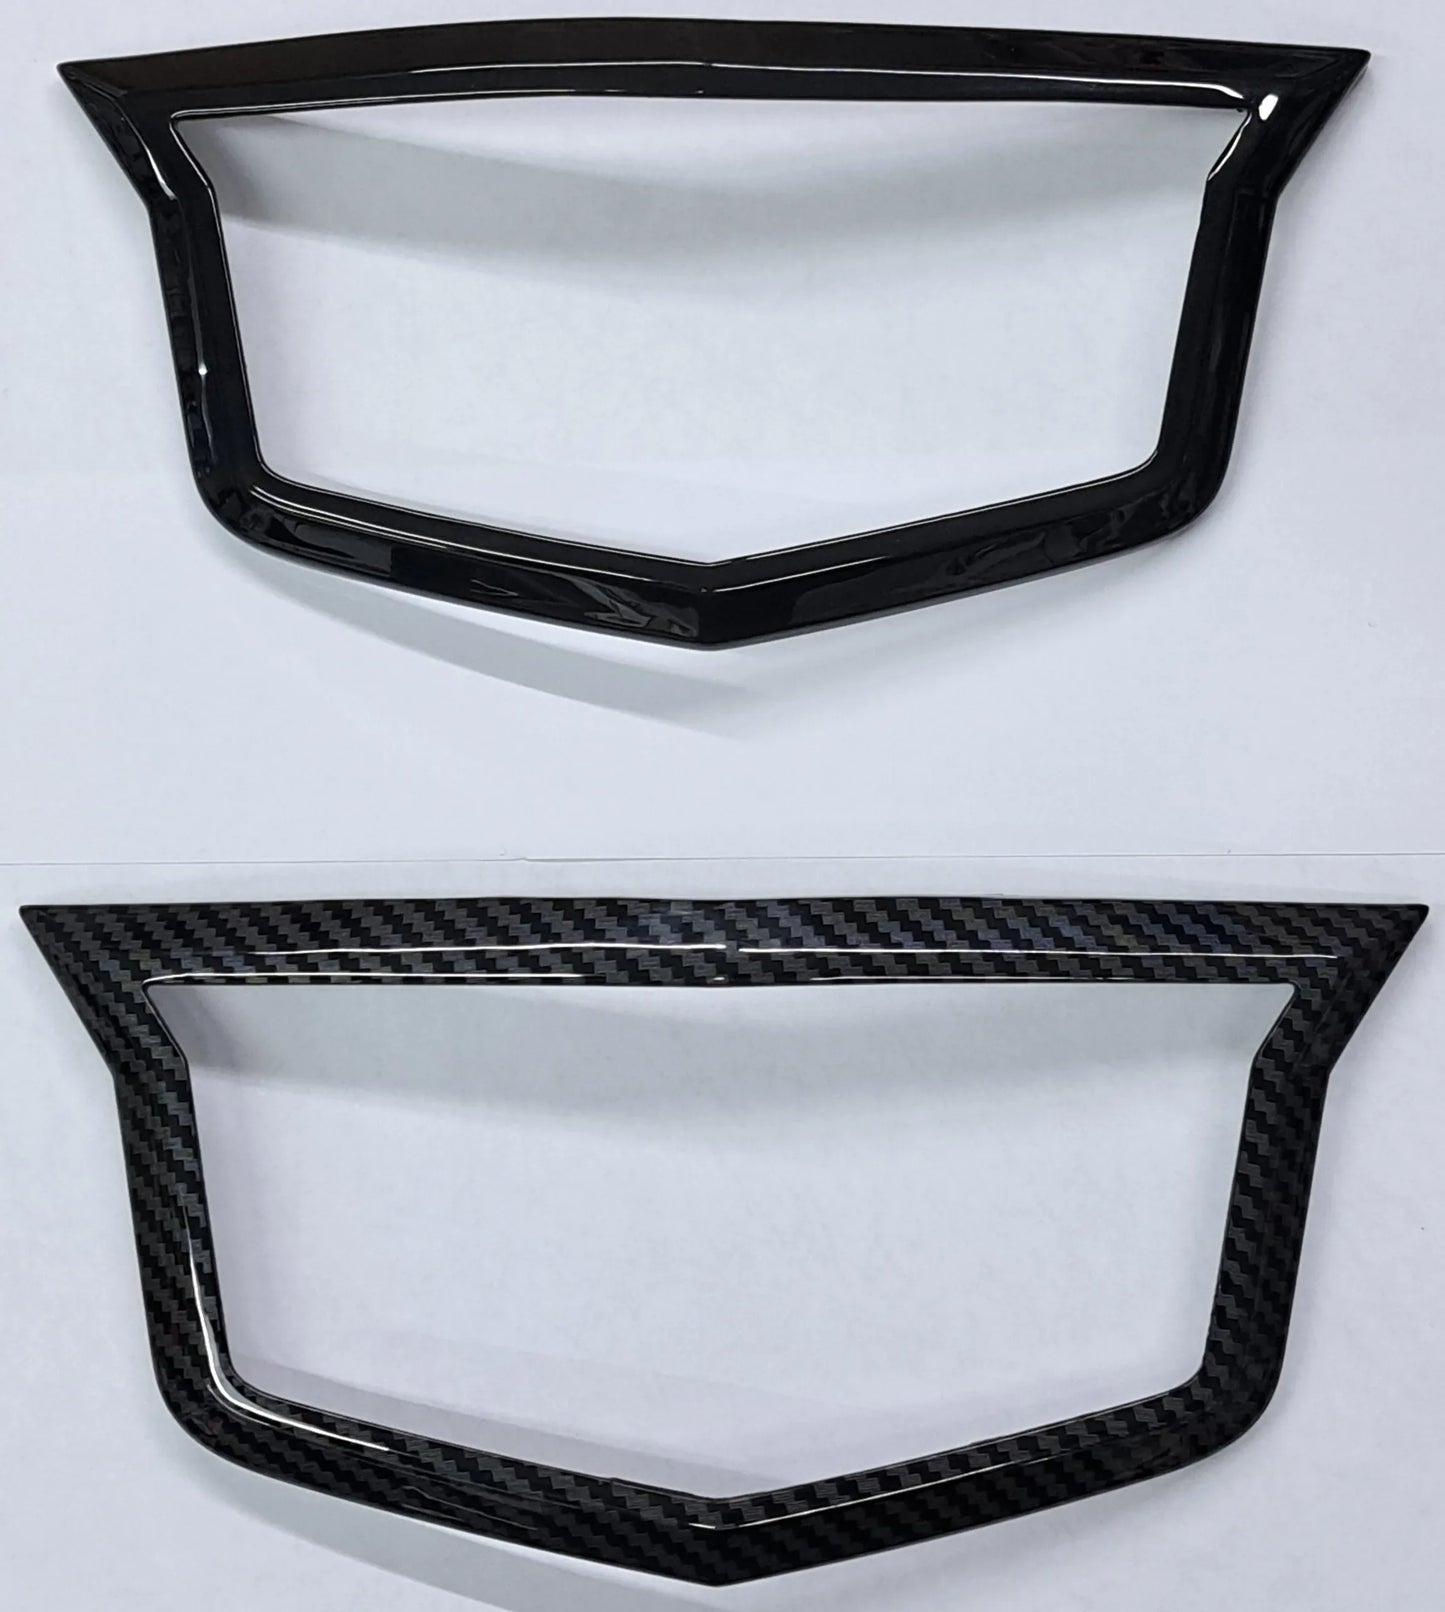 Cadillac CT4-V Front Adaptive Cruise Emblem Trim Cover in Carbon Fiber Print or Gloss Black